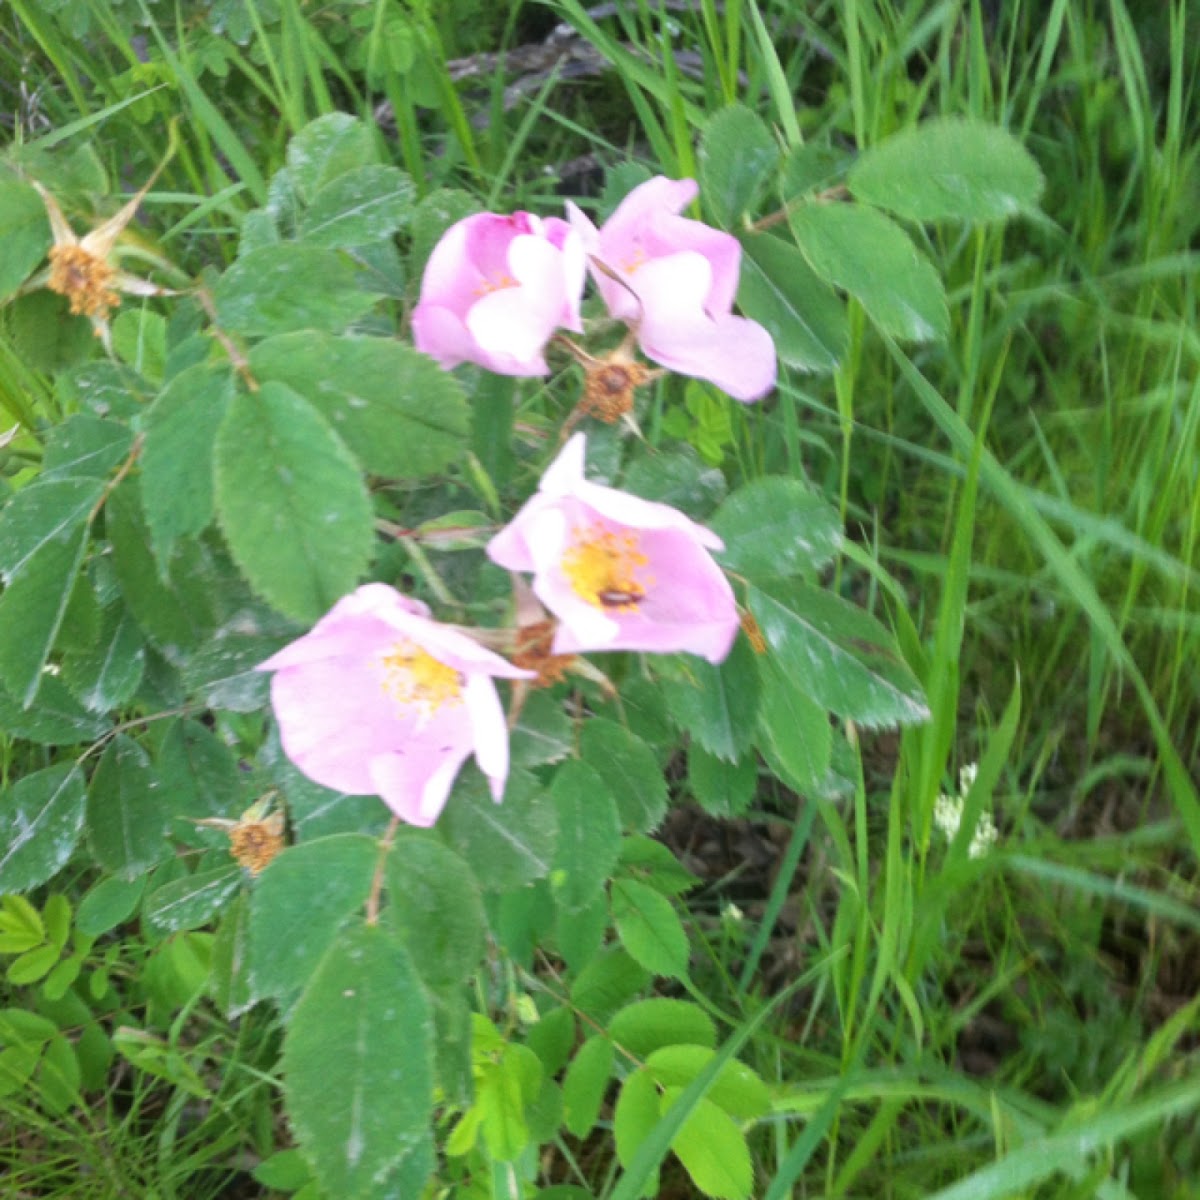 Wild rose (there are several different species)